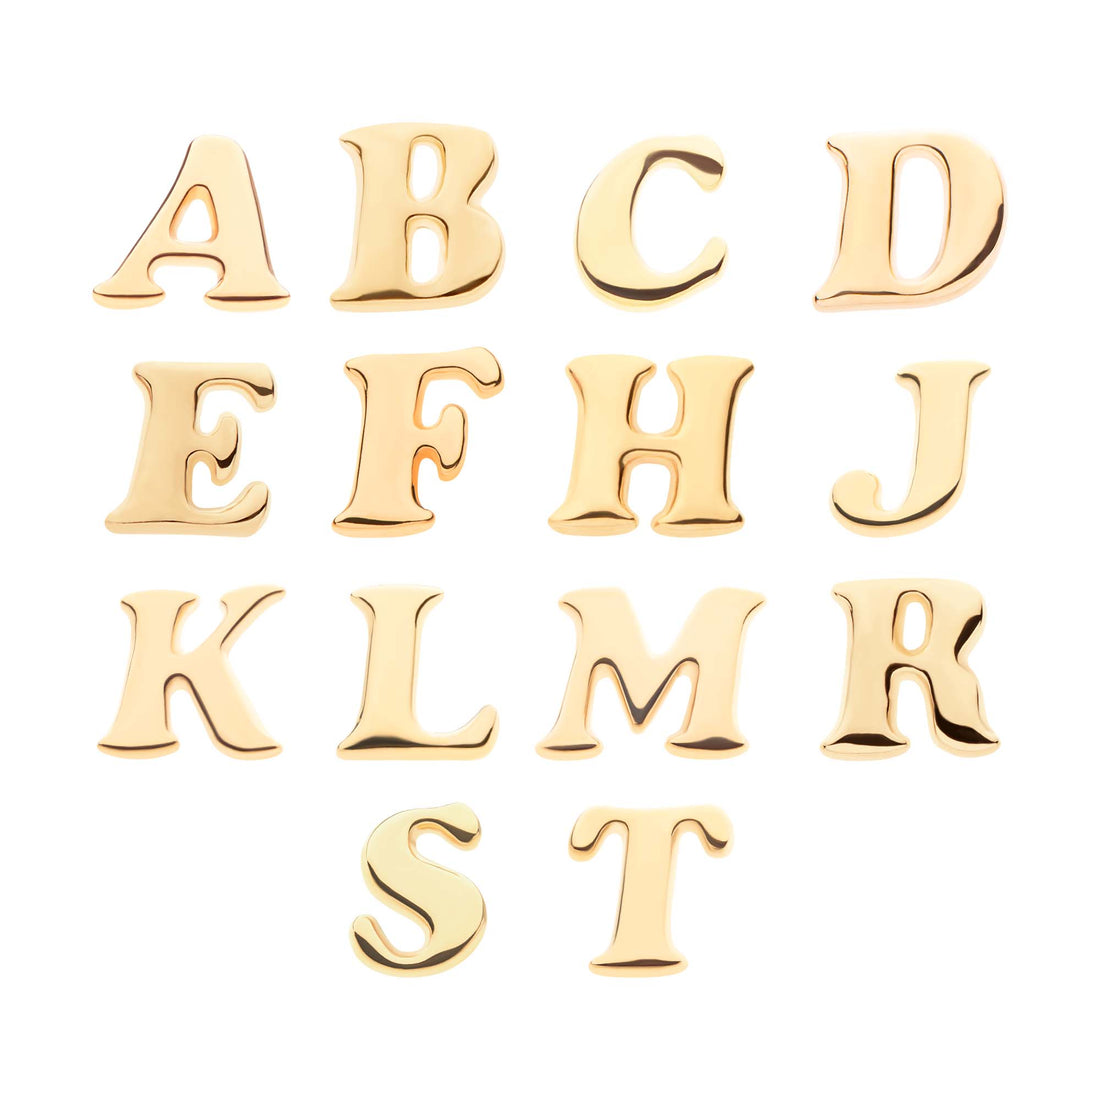 14kt Yellow Gold Threadless Cooper Black Italic Letter Initial Tops